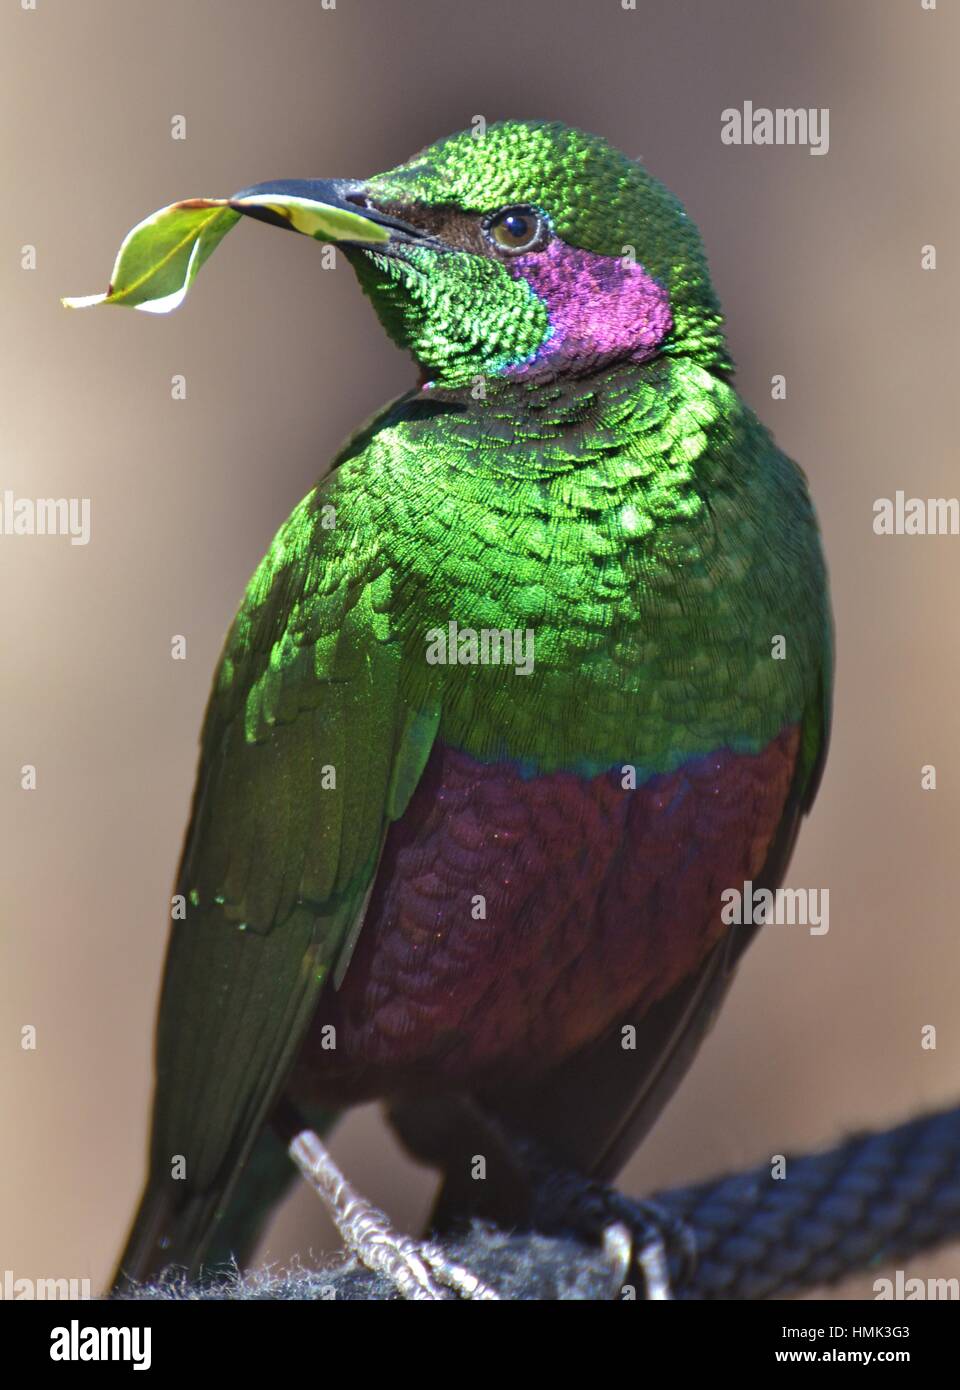 The emerald starling (Lamprotornis iris) is also known as the iris glossy starling. It is found in West Africa. Stock Photo